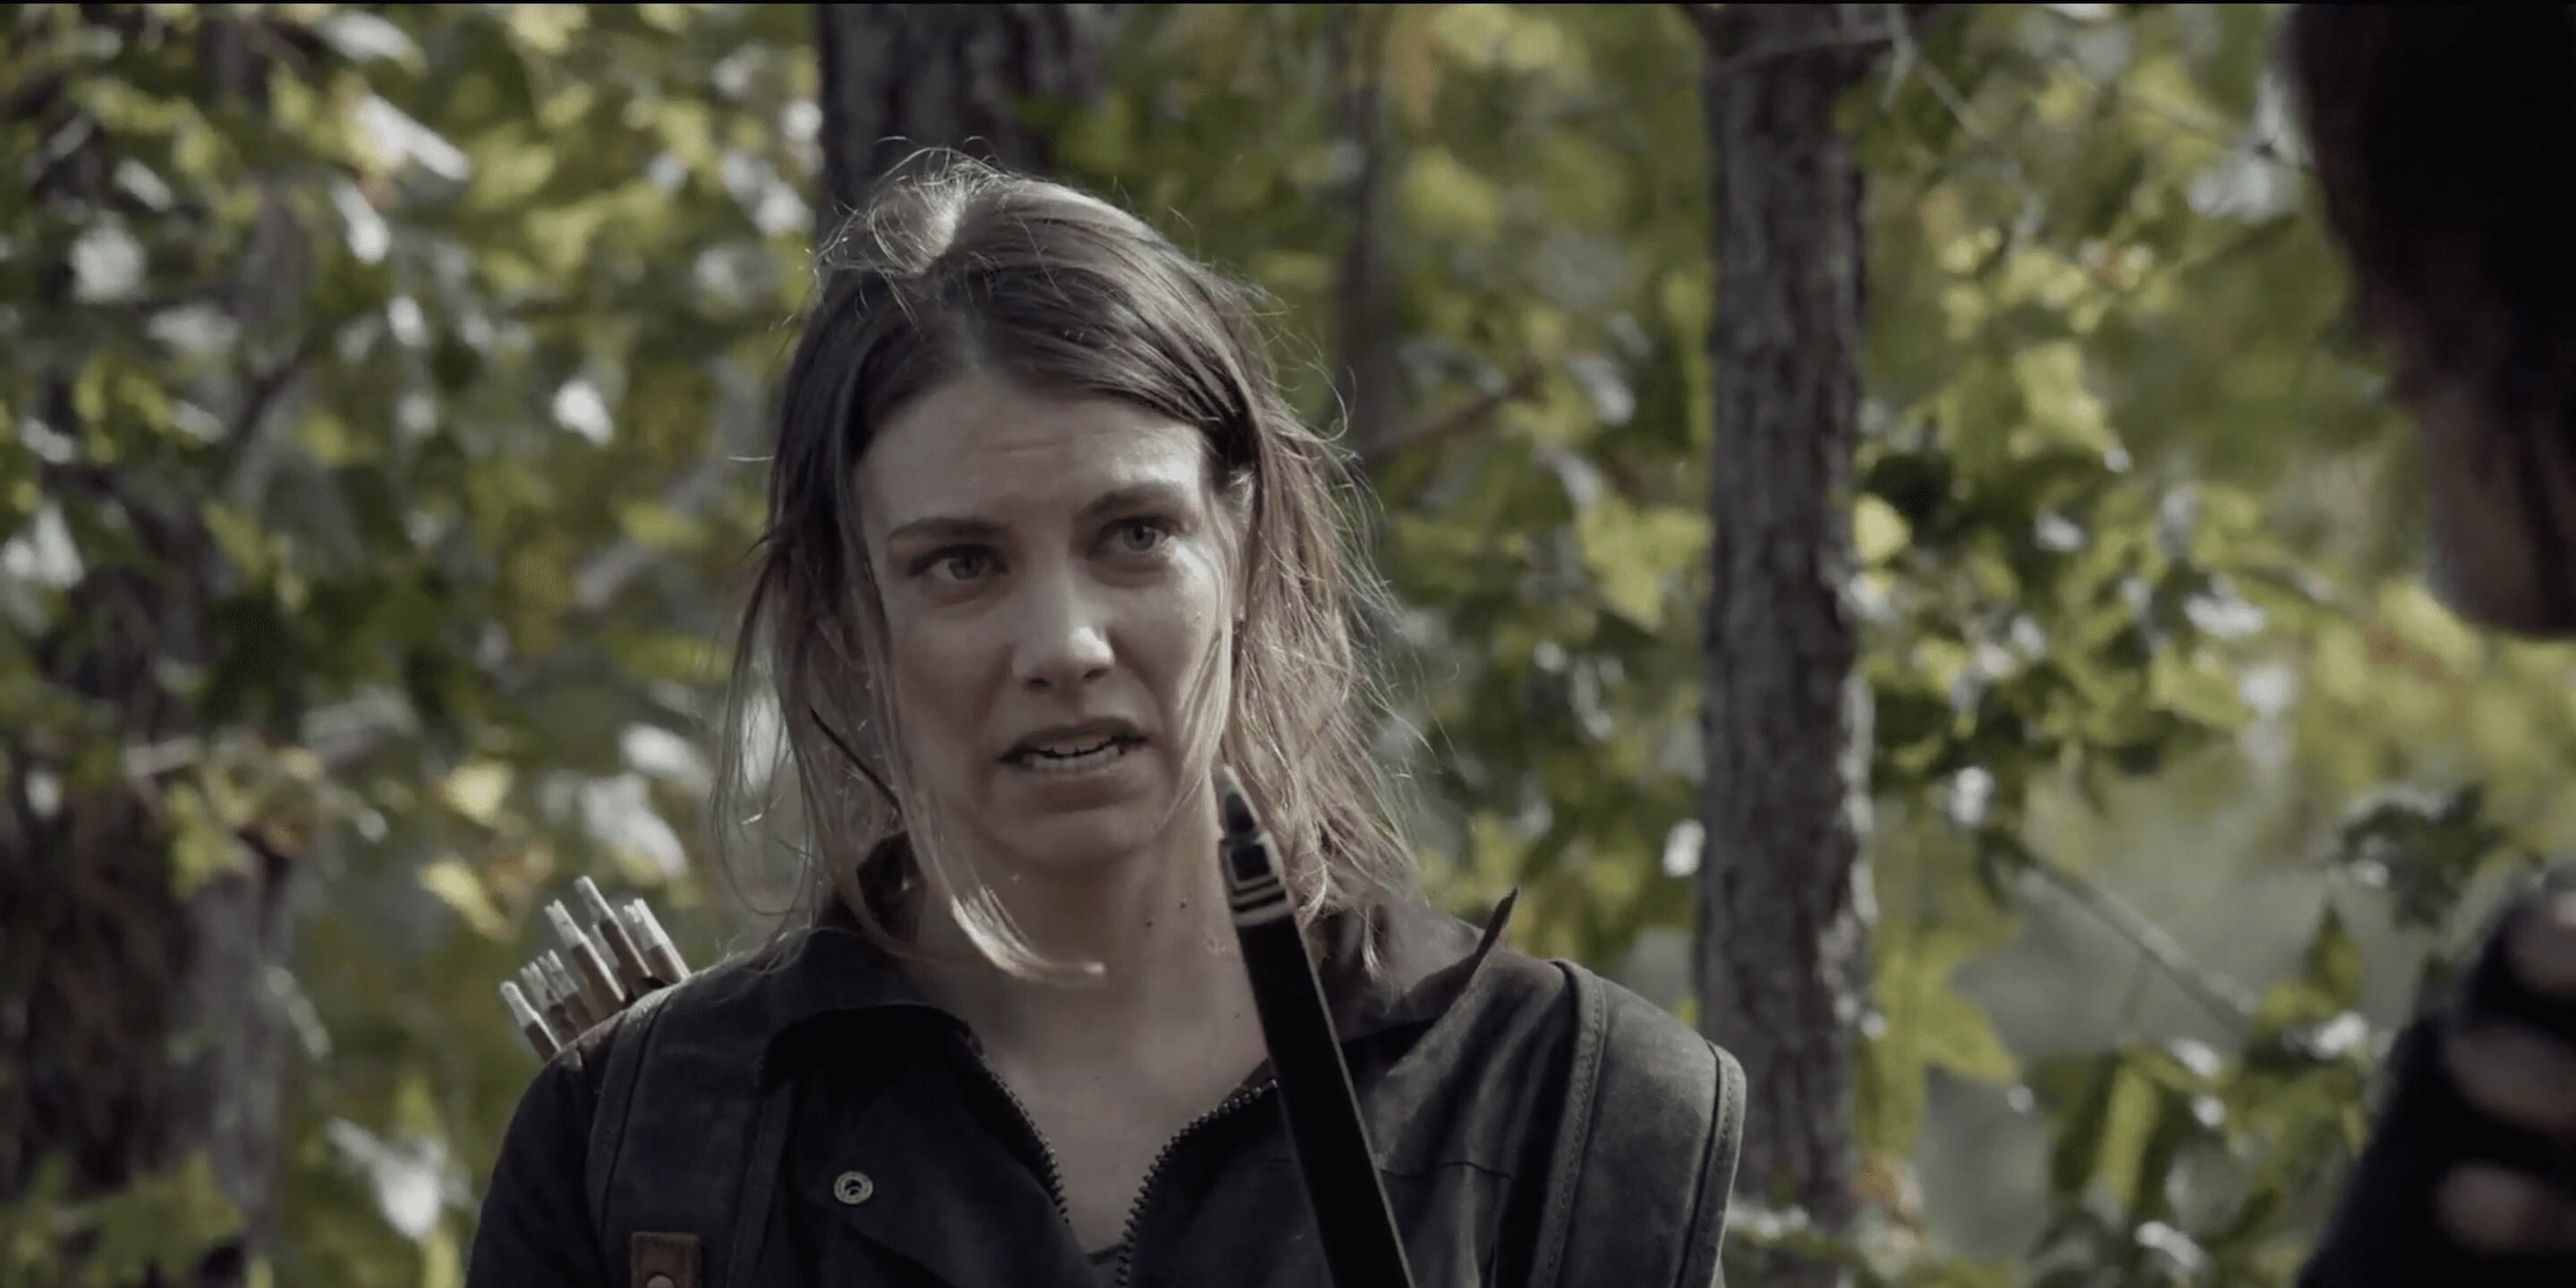 The Walking Dead Season 10 - Episode 17 Review - "Home Sweet Home"